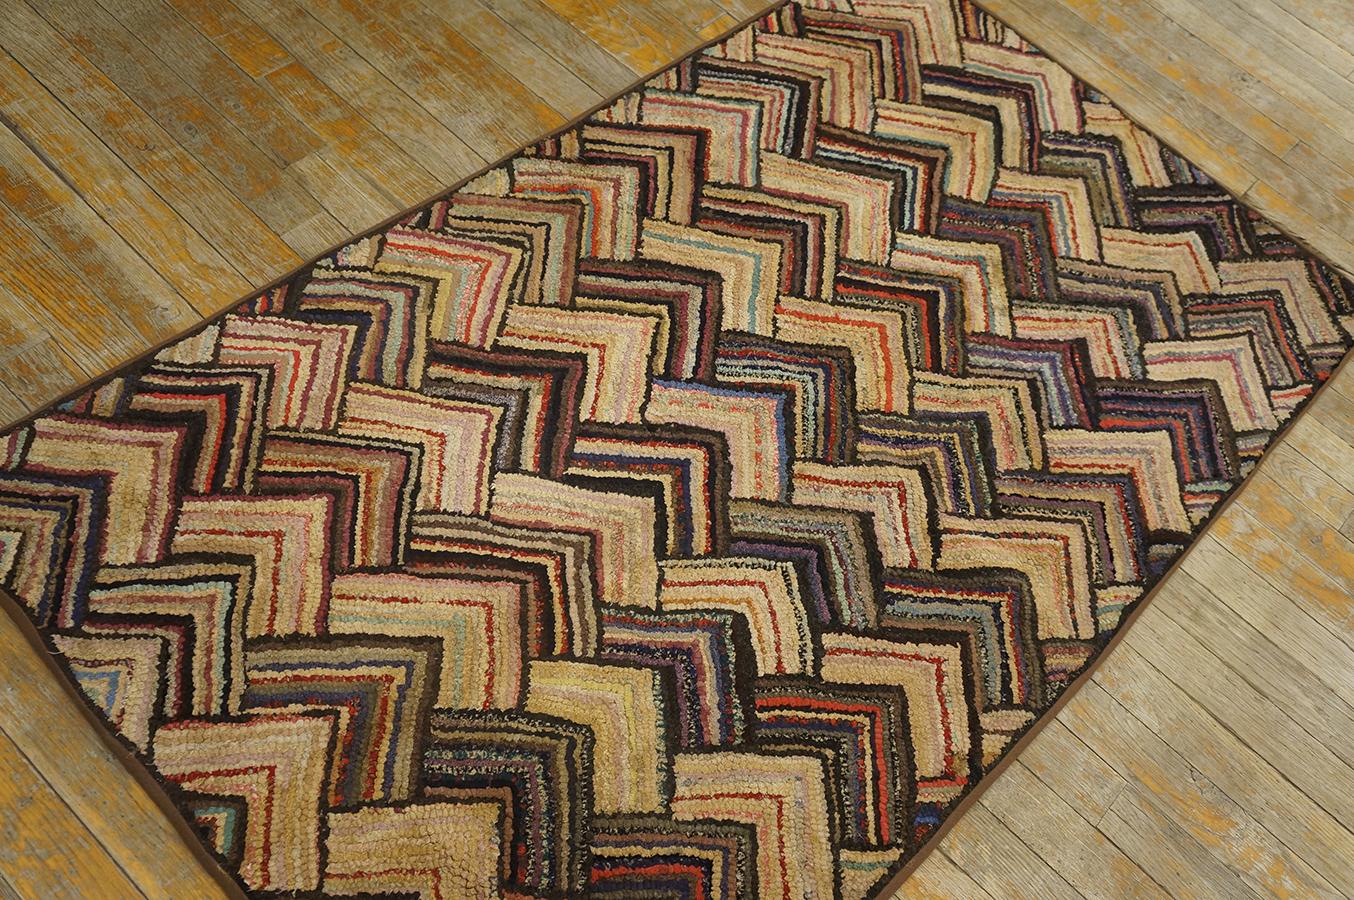 Early 20th Century American Hooked Rug ( 2' 7'' x 4' 6'' - 78 x 137 cm ) In Good Condition For Sale In New York, NY